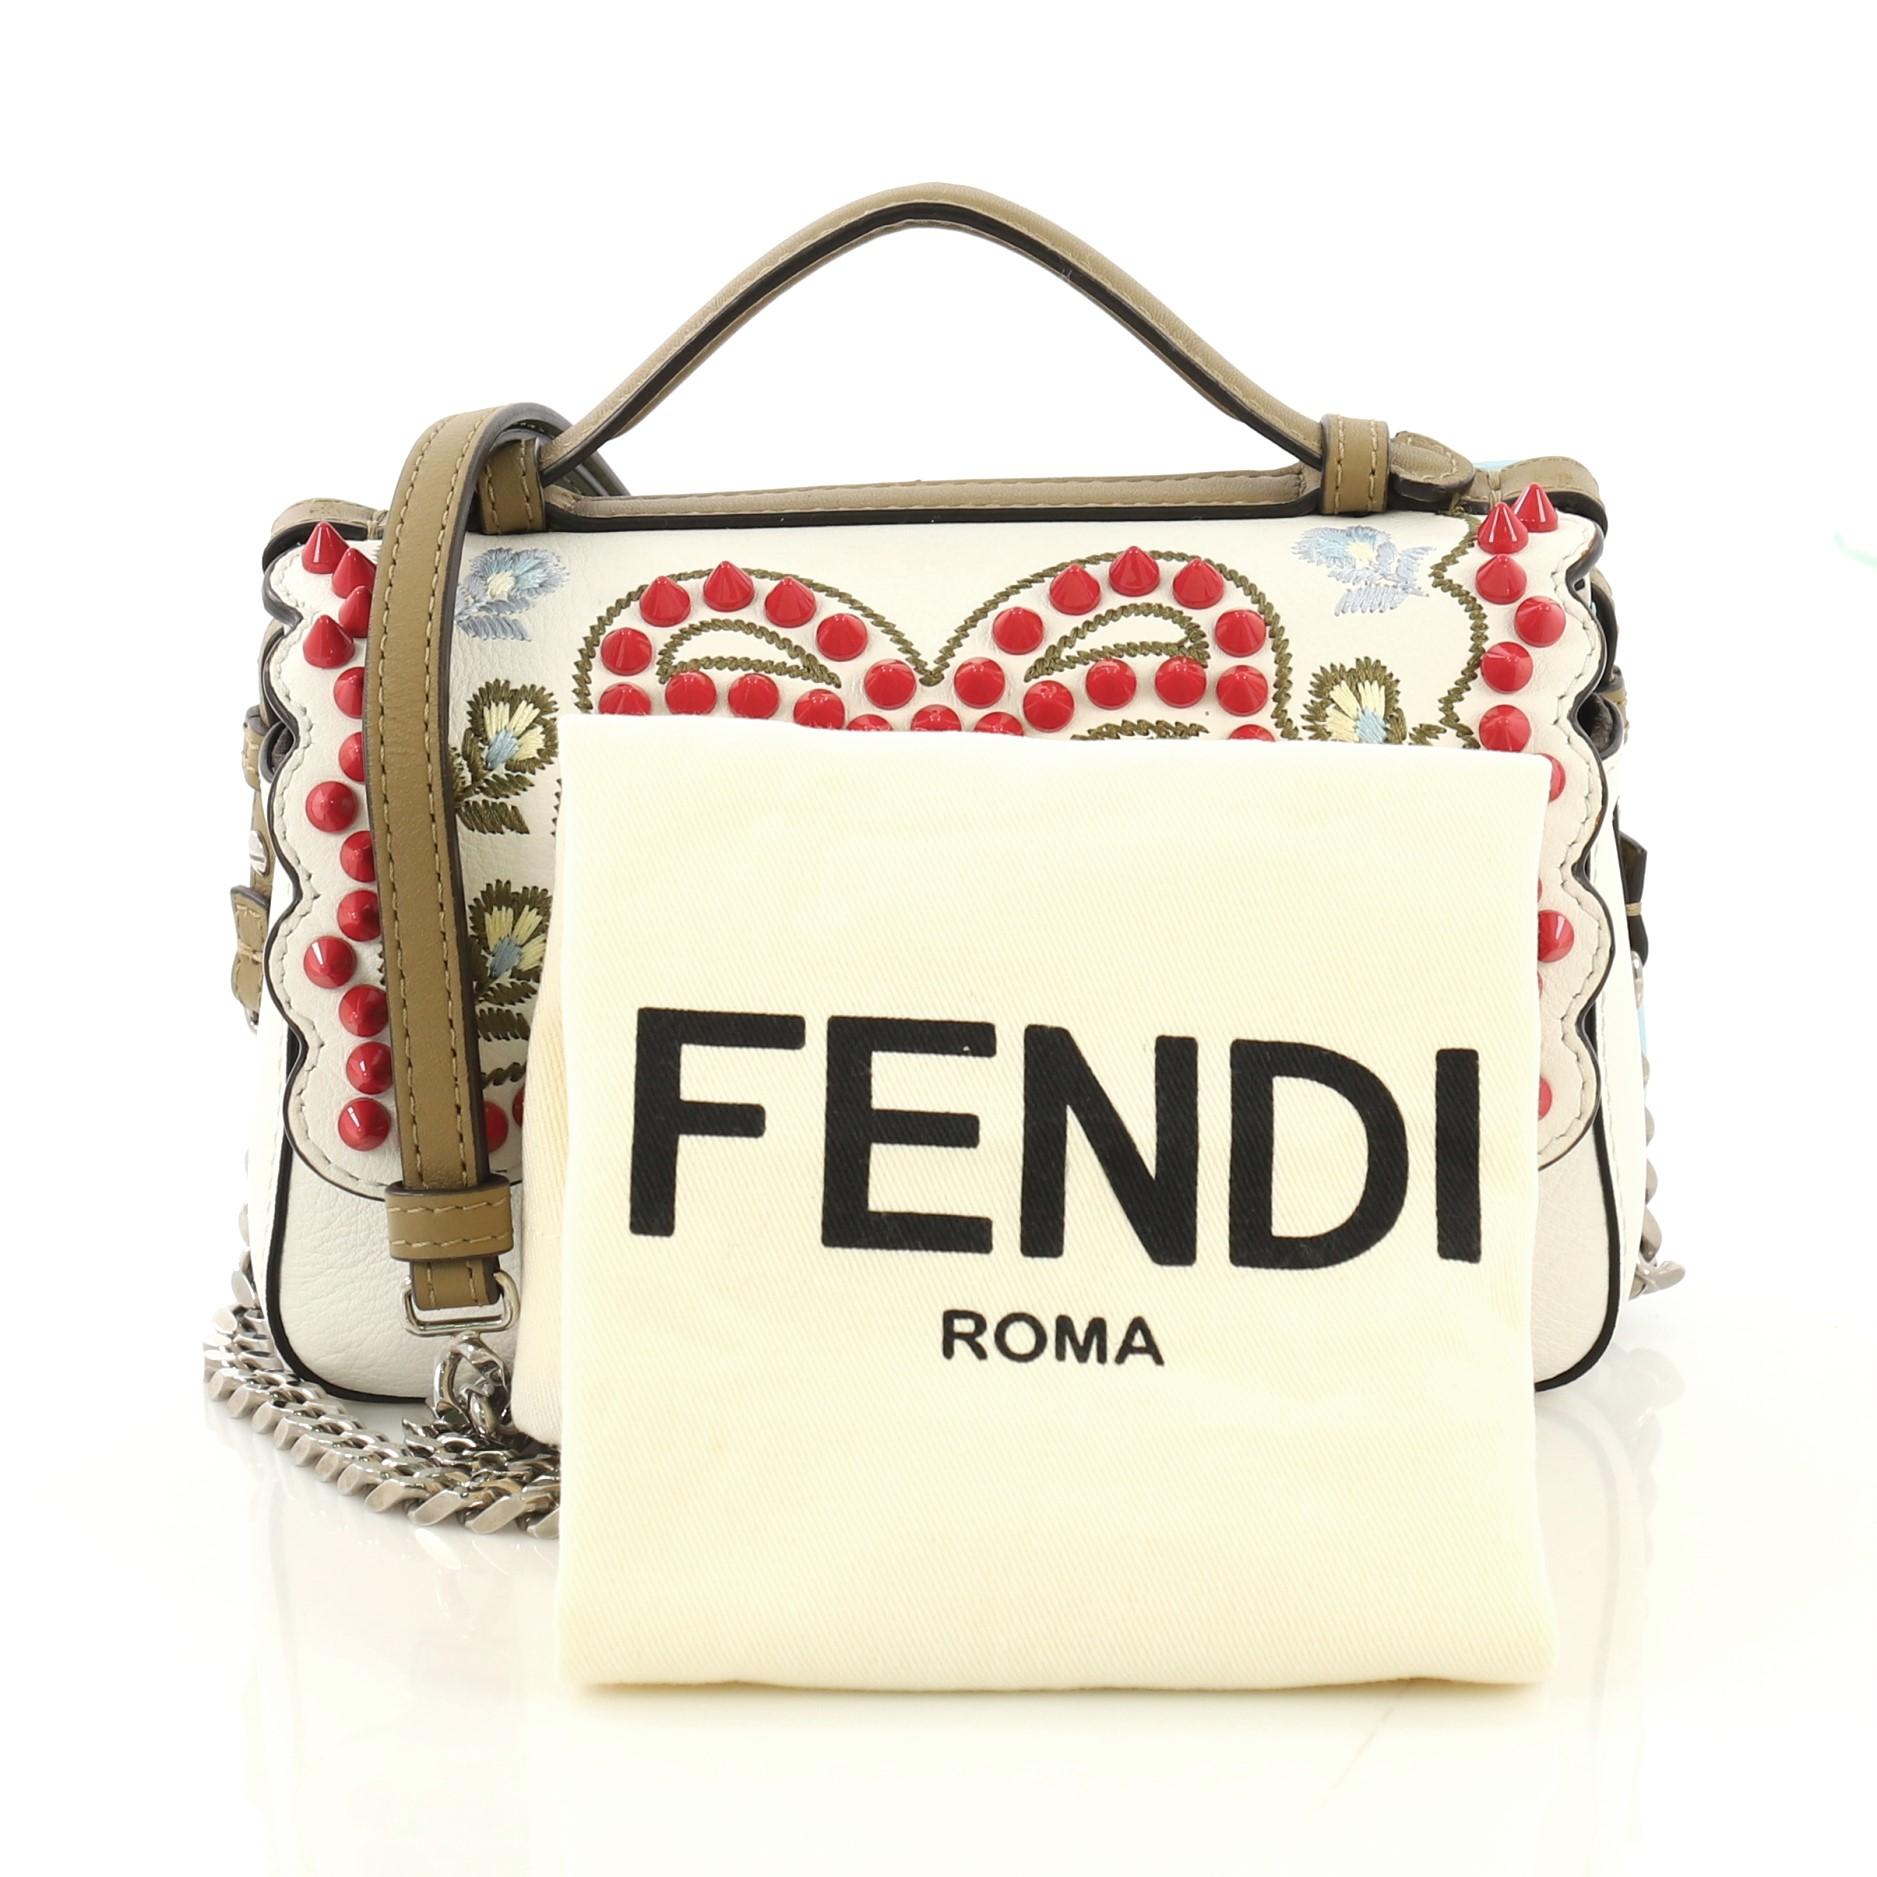 This Fendi Double Baguette Embroidered Studded Leather Micro, crafted from white and light blue leather, features embroidered and studded detailing, leather top handle, two micro baguette-shaped compartments, FF logo, and silver-tone hardware. Its